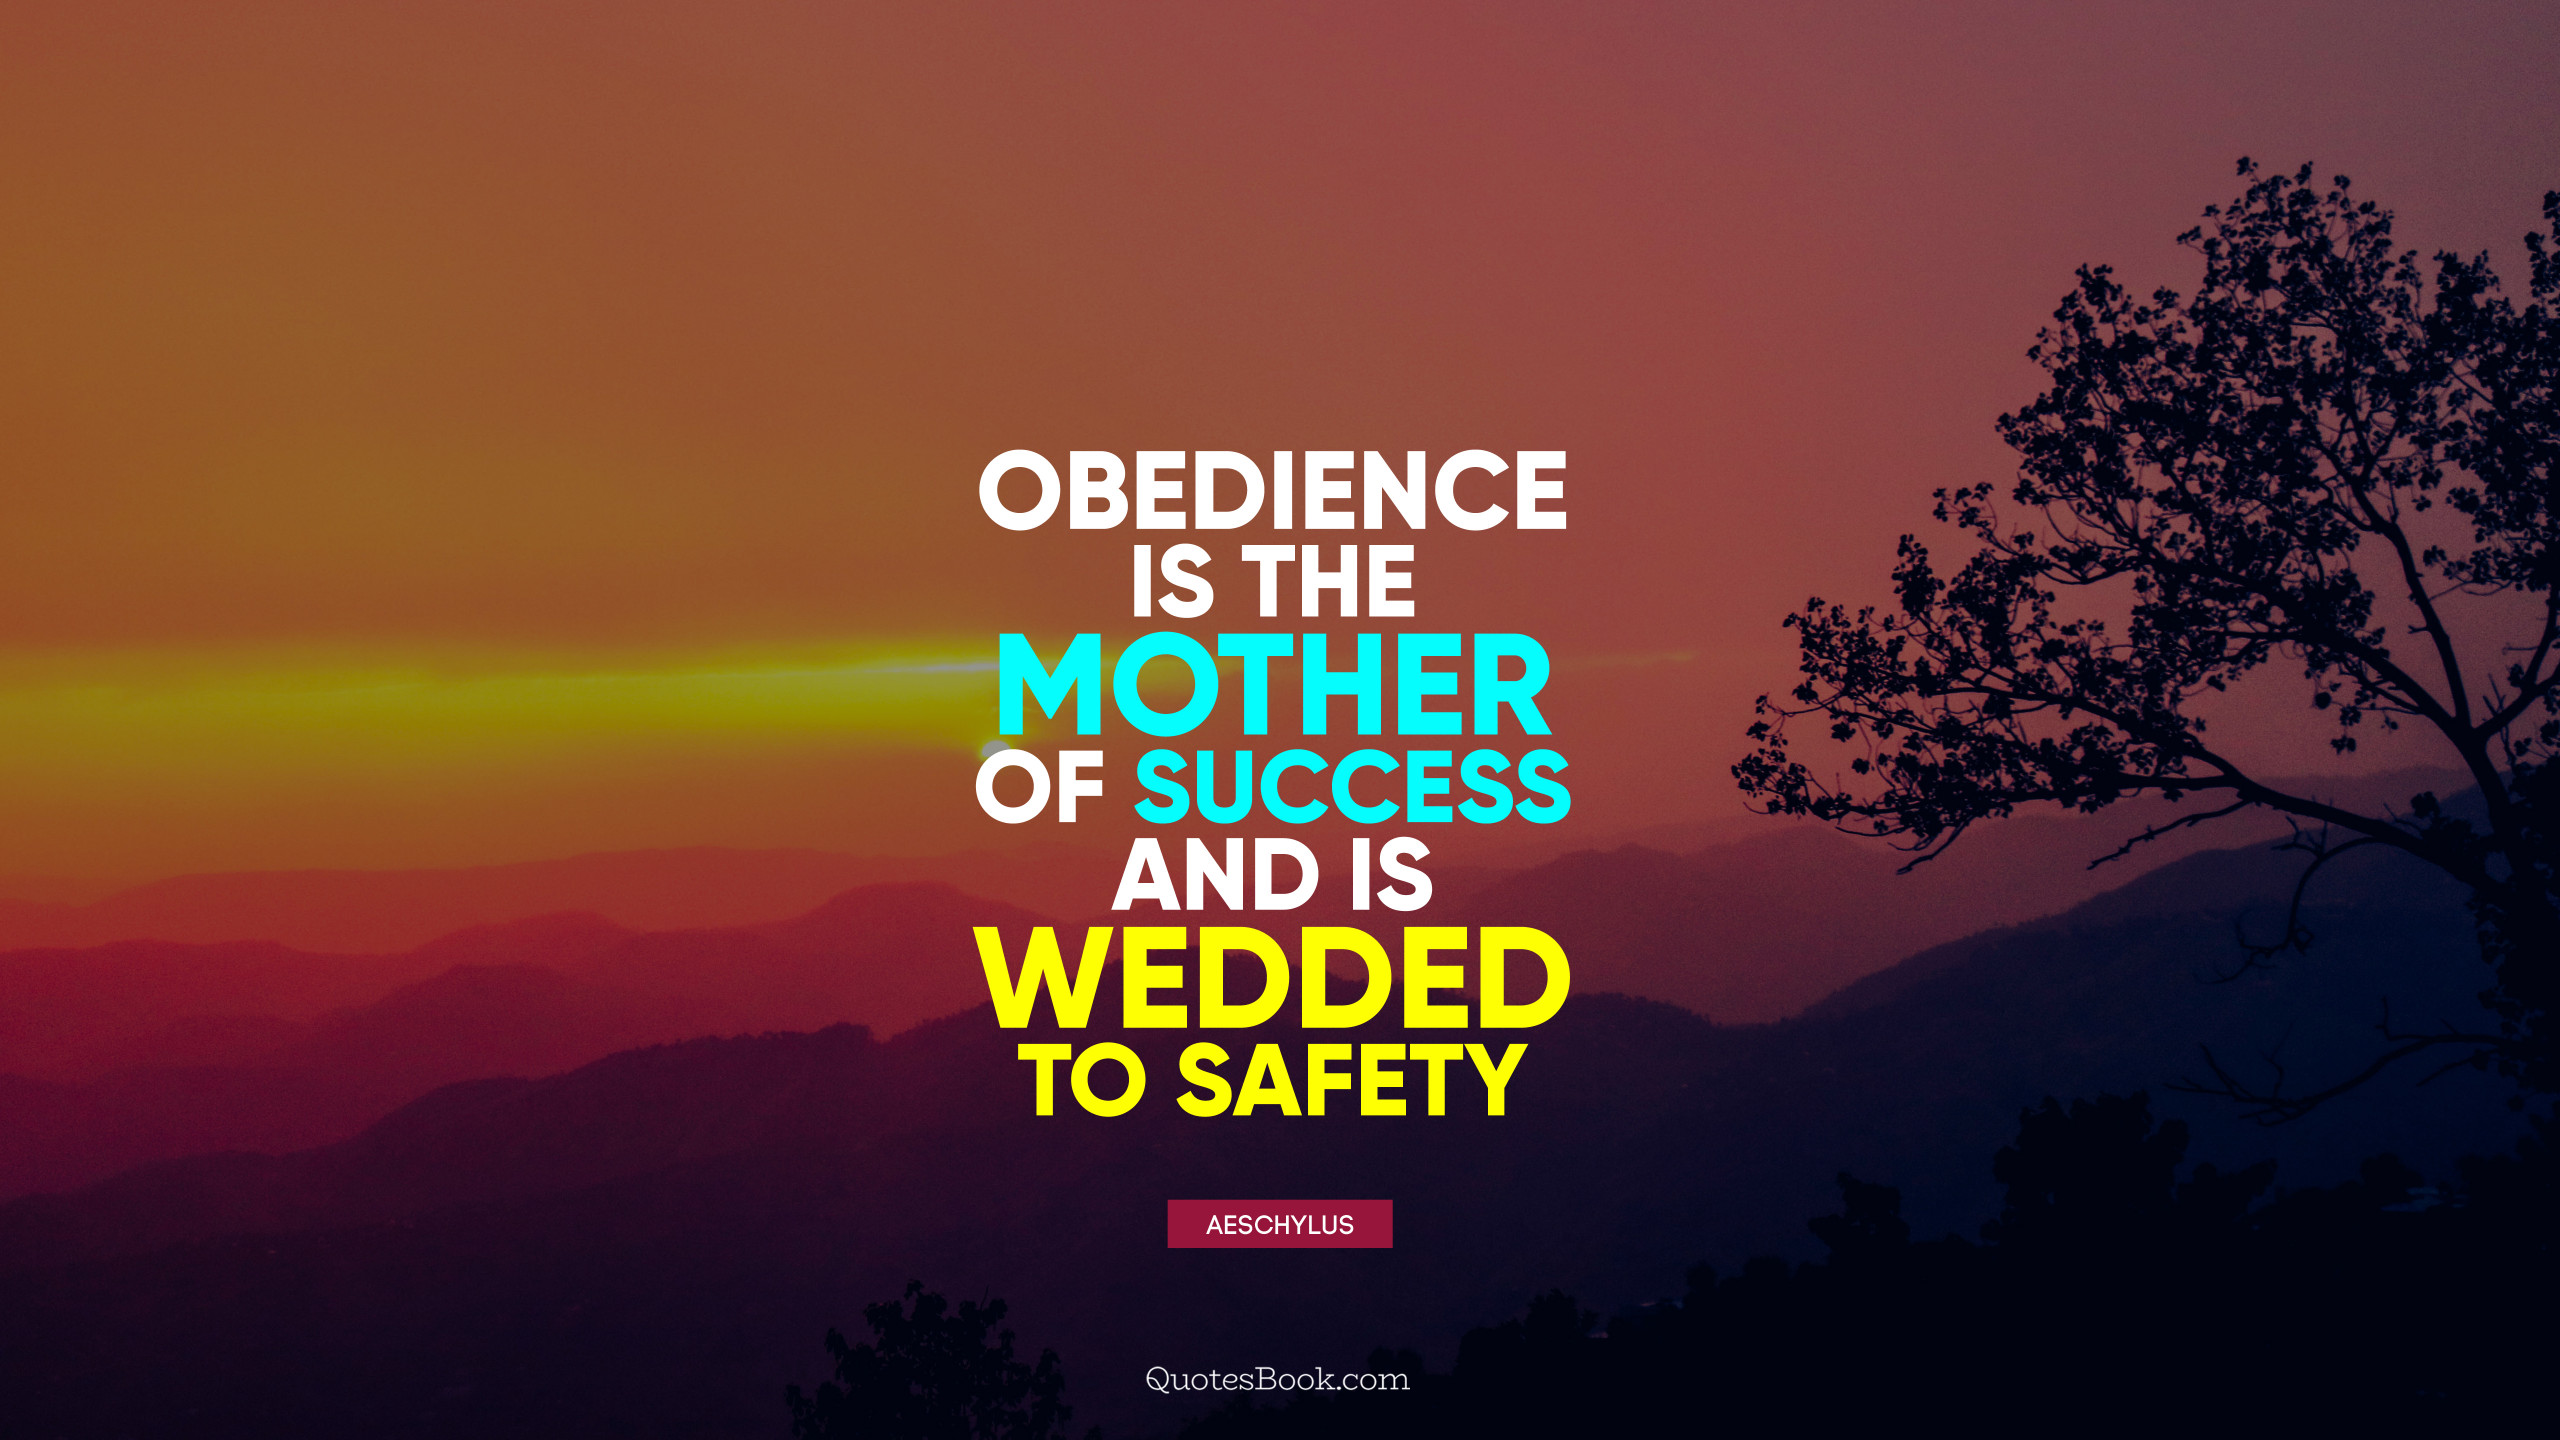 Obedience is the mother of success and is wedded to safety. - Quote by